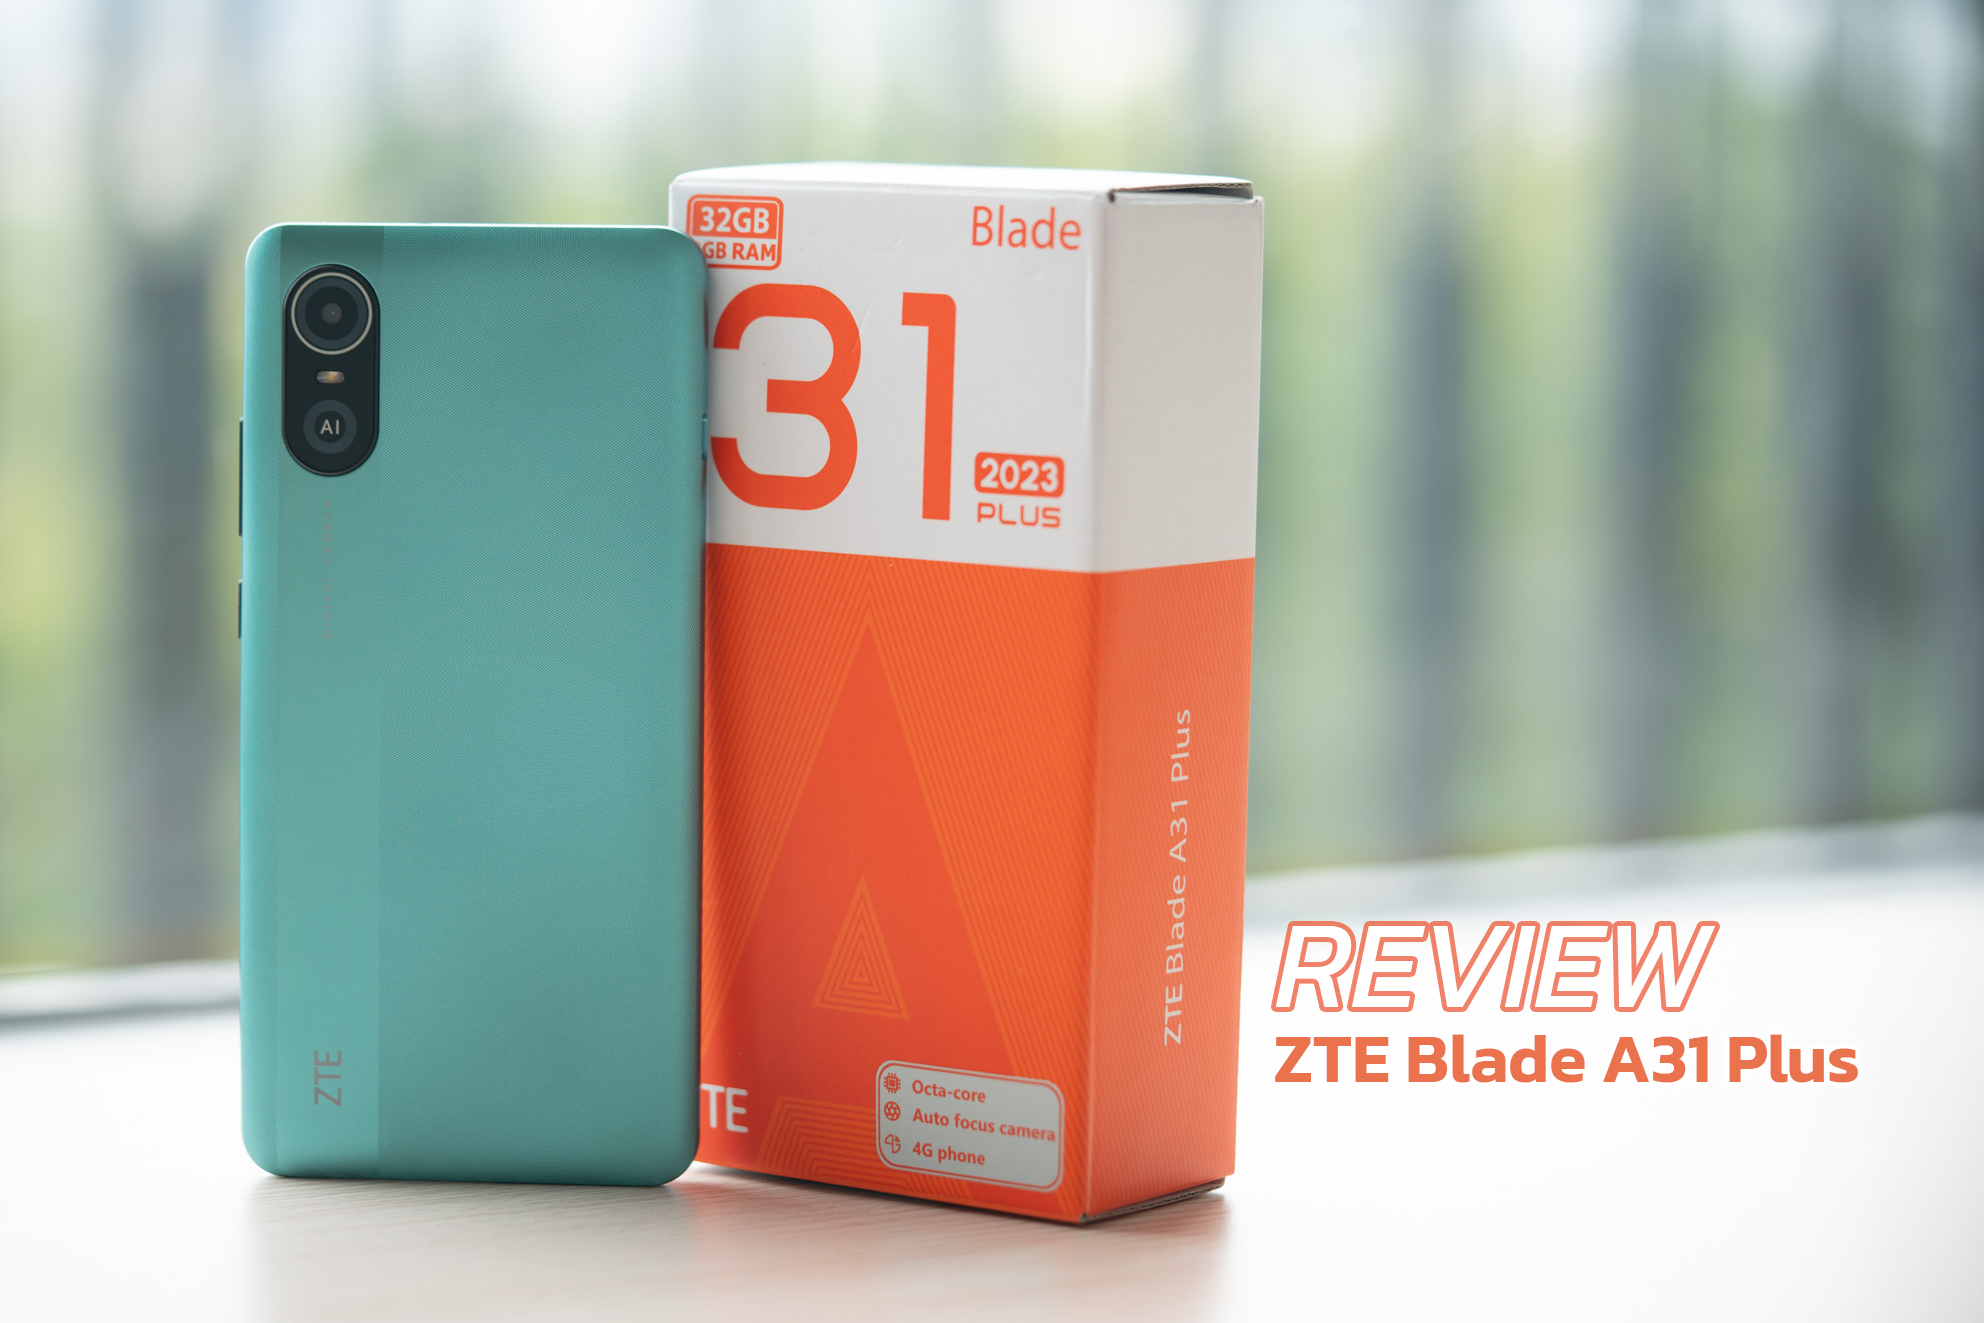 Review ZTE Blade A31 